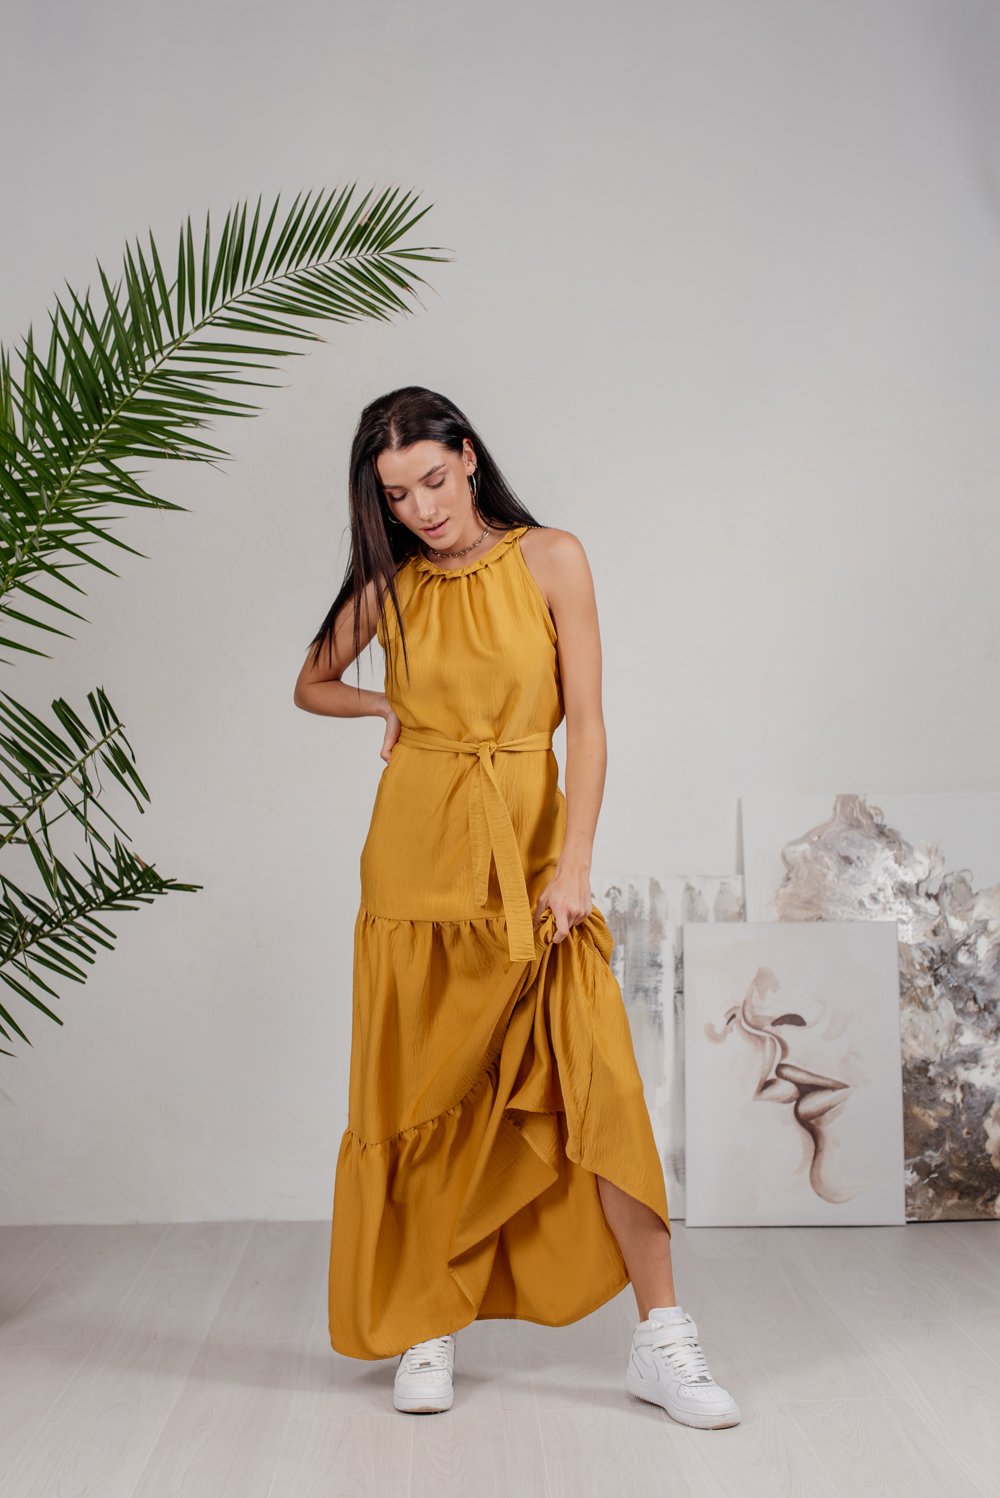 Amber tiered floor length dress with open shoulders and ruffles